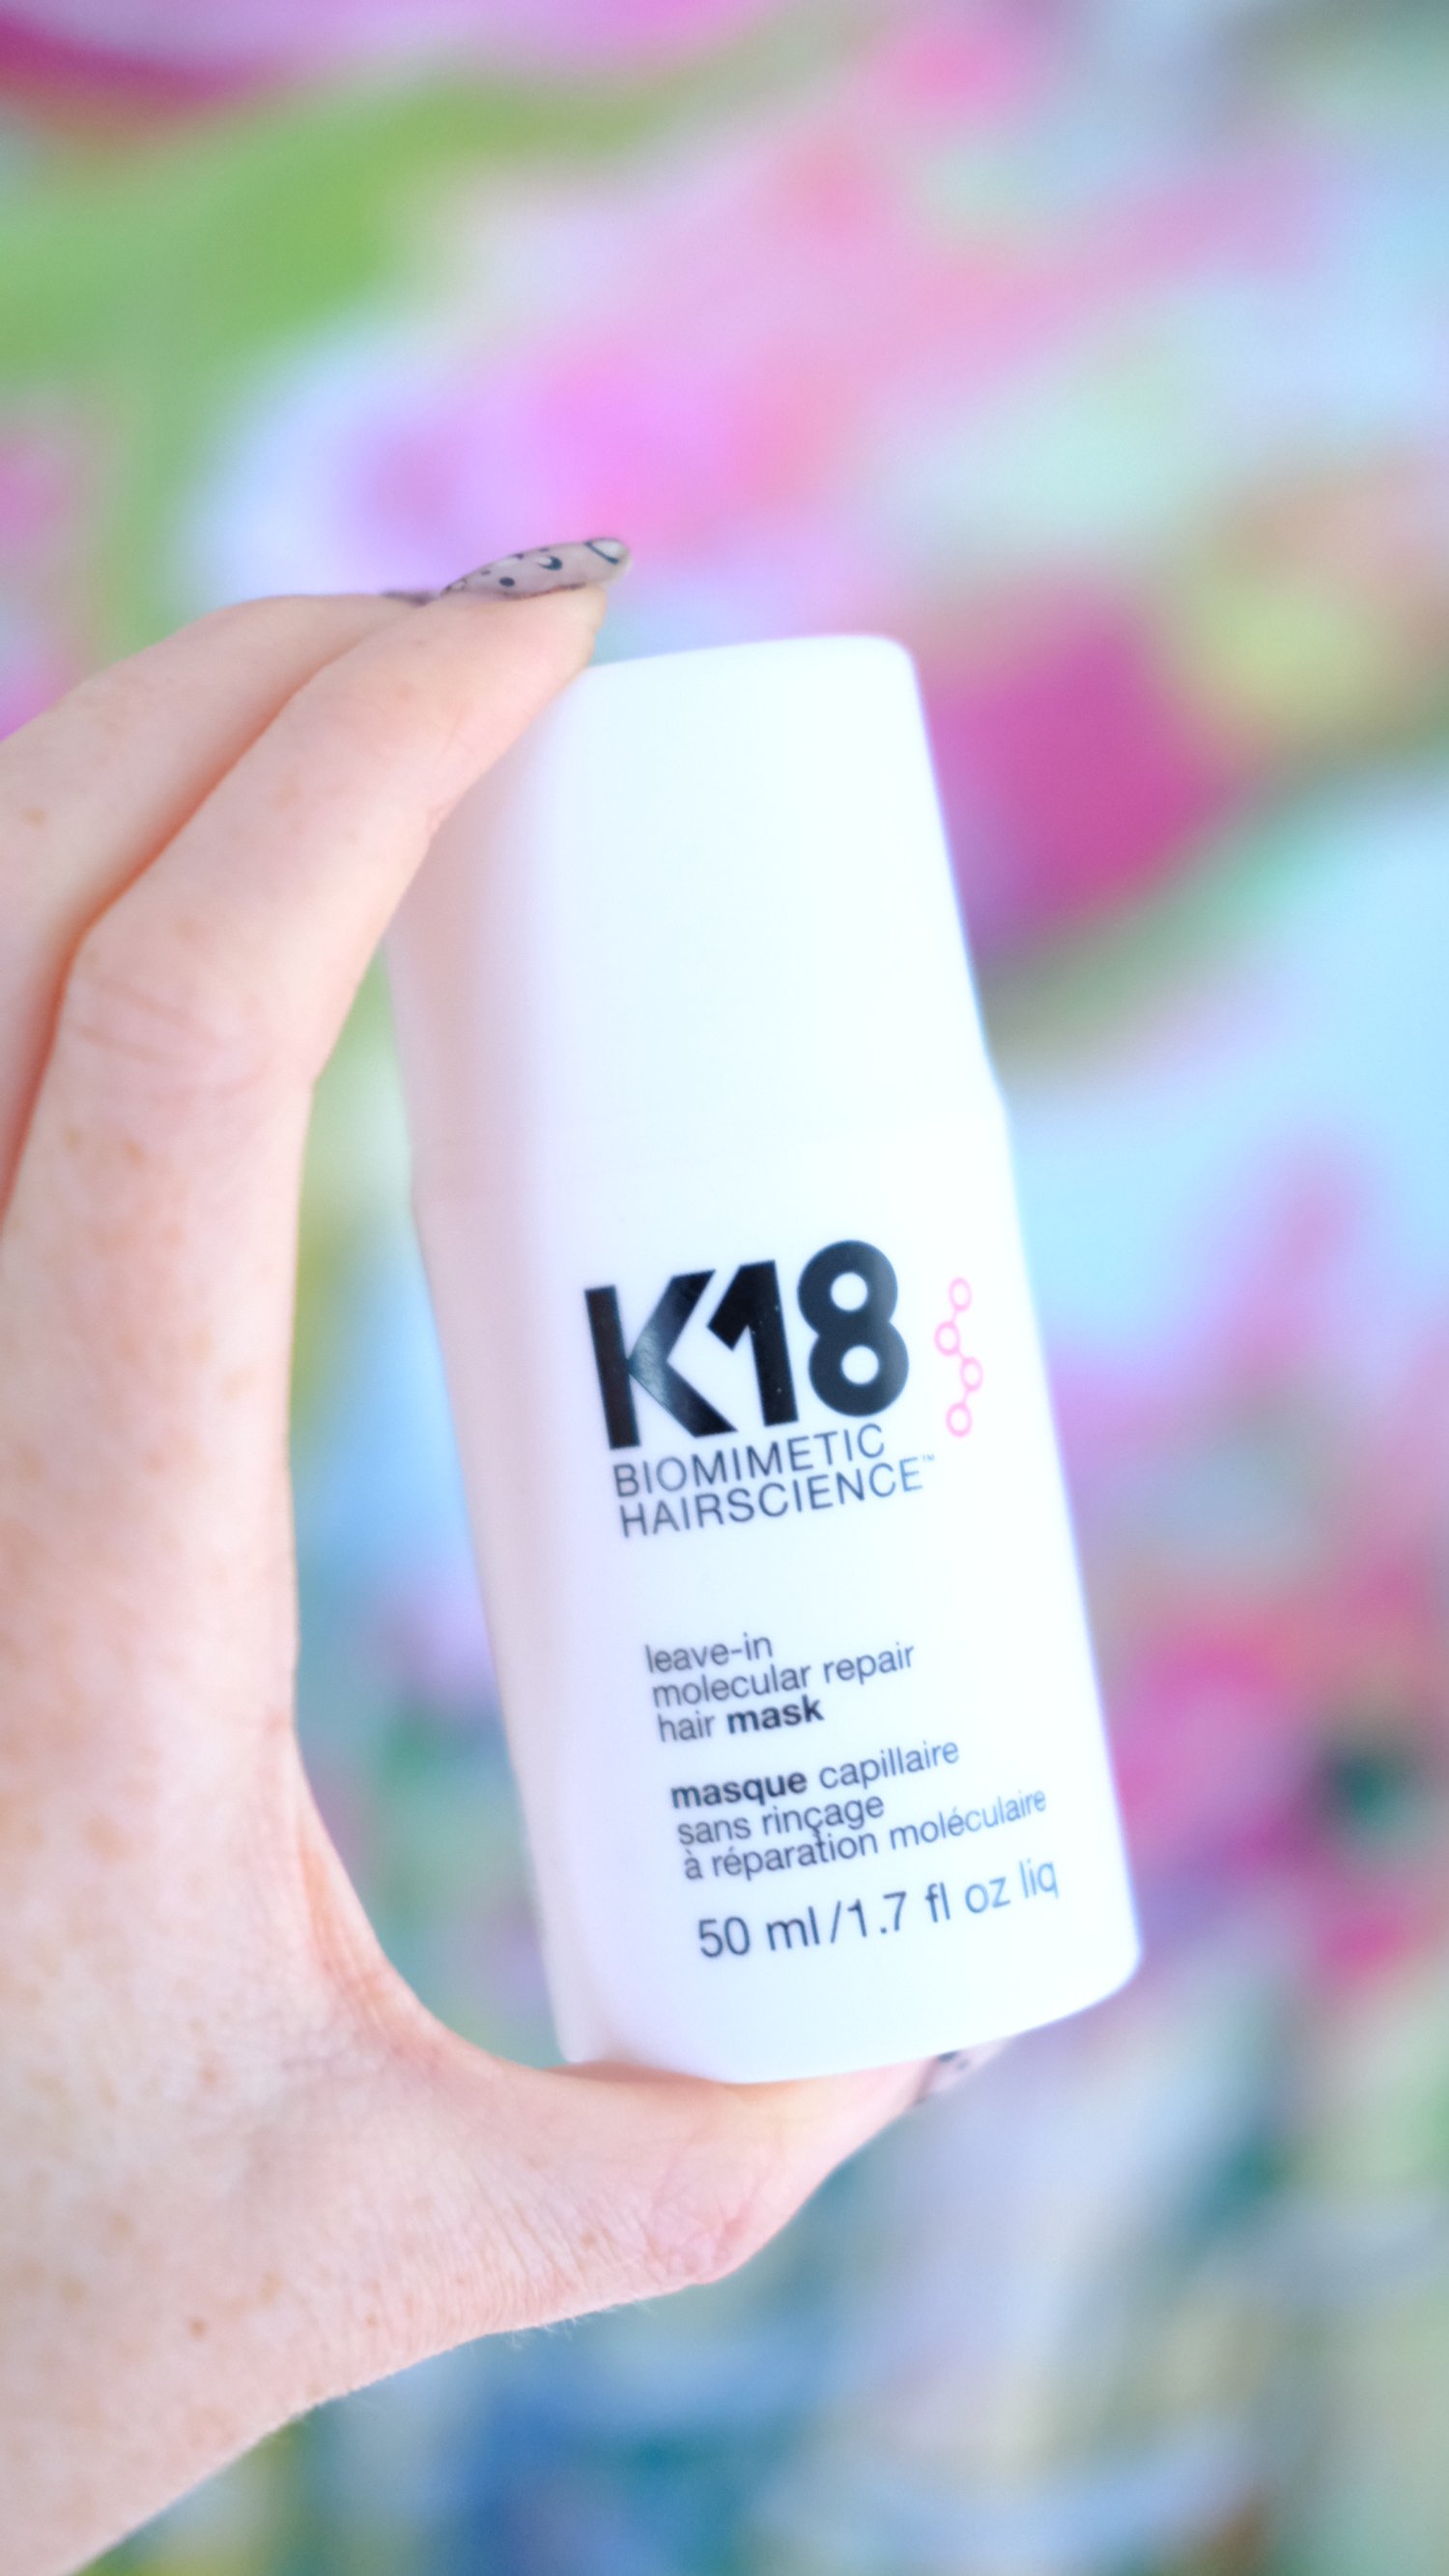 K18 hair mask reviews. Is K18 worth it